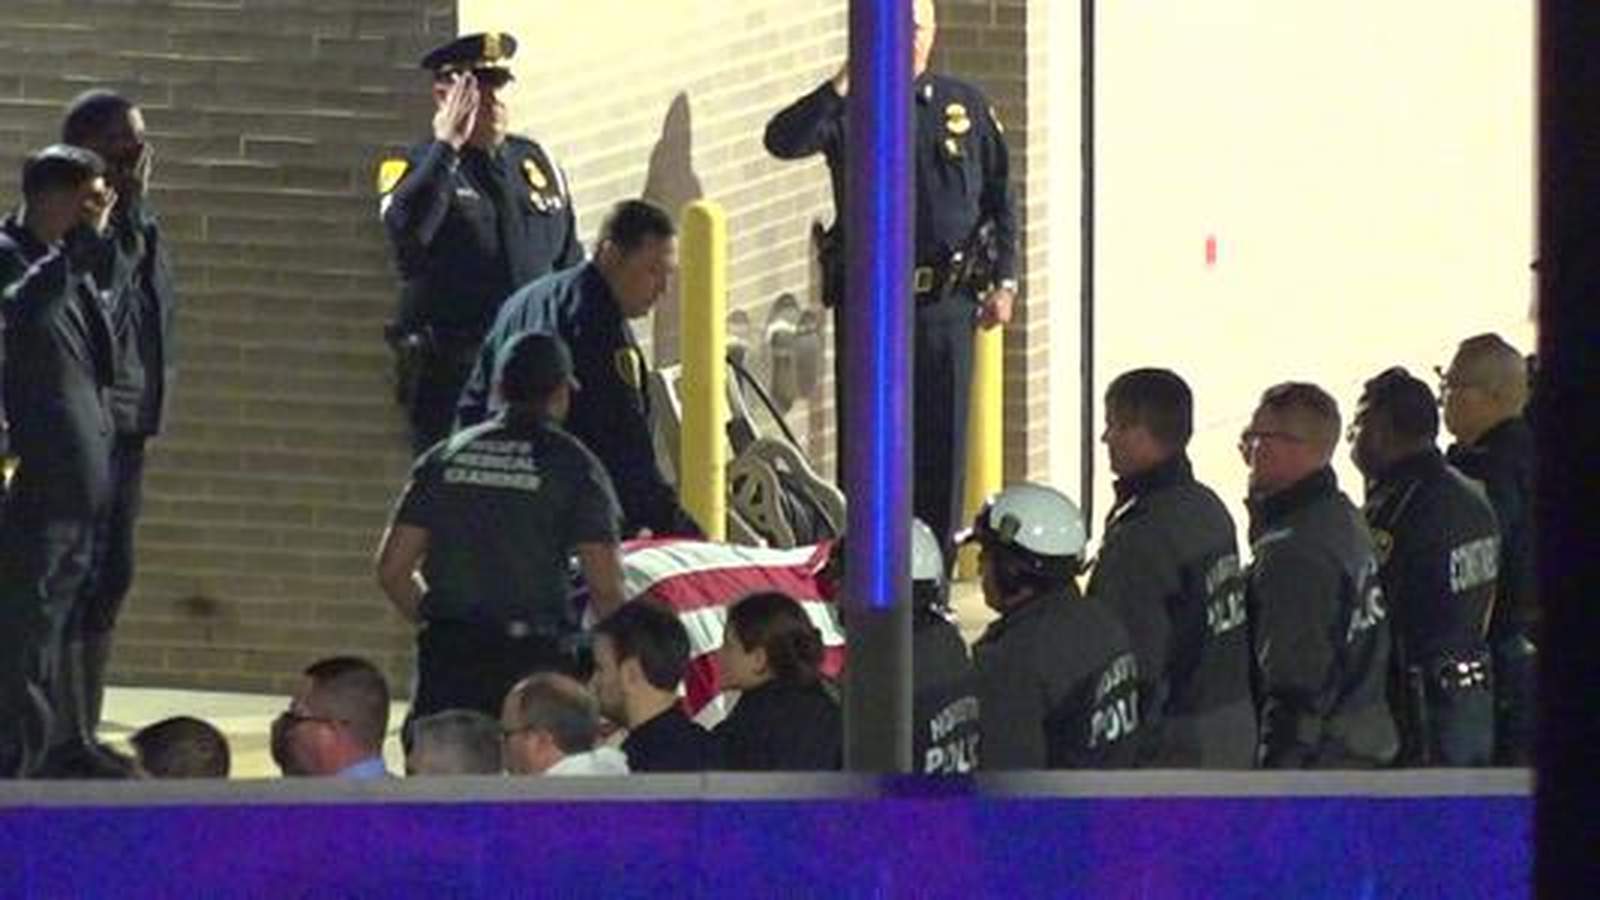 WATCH: Casket of fallen Houston officer saluted as his body arrives at Medical Examiner’s Office